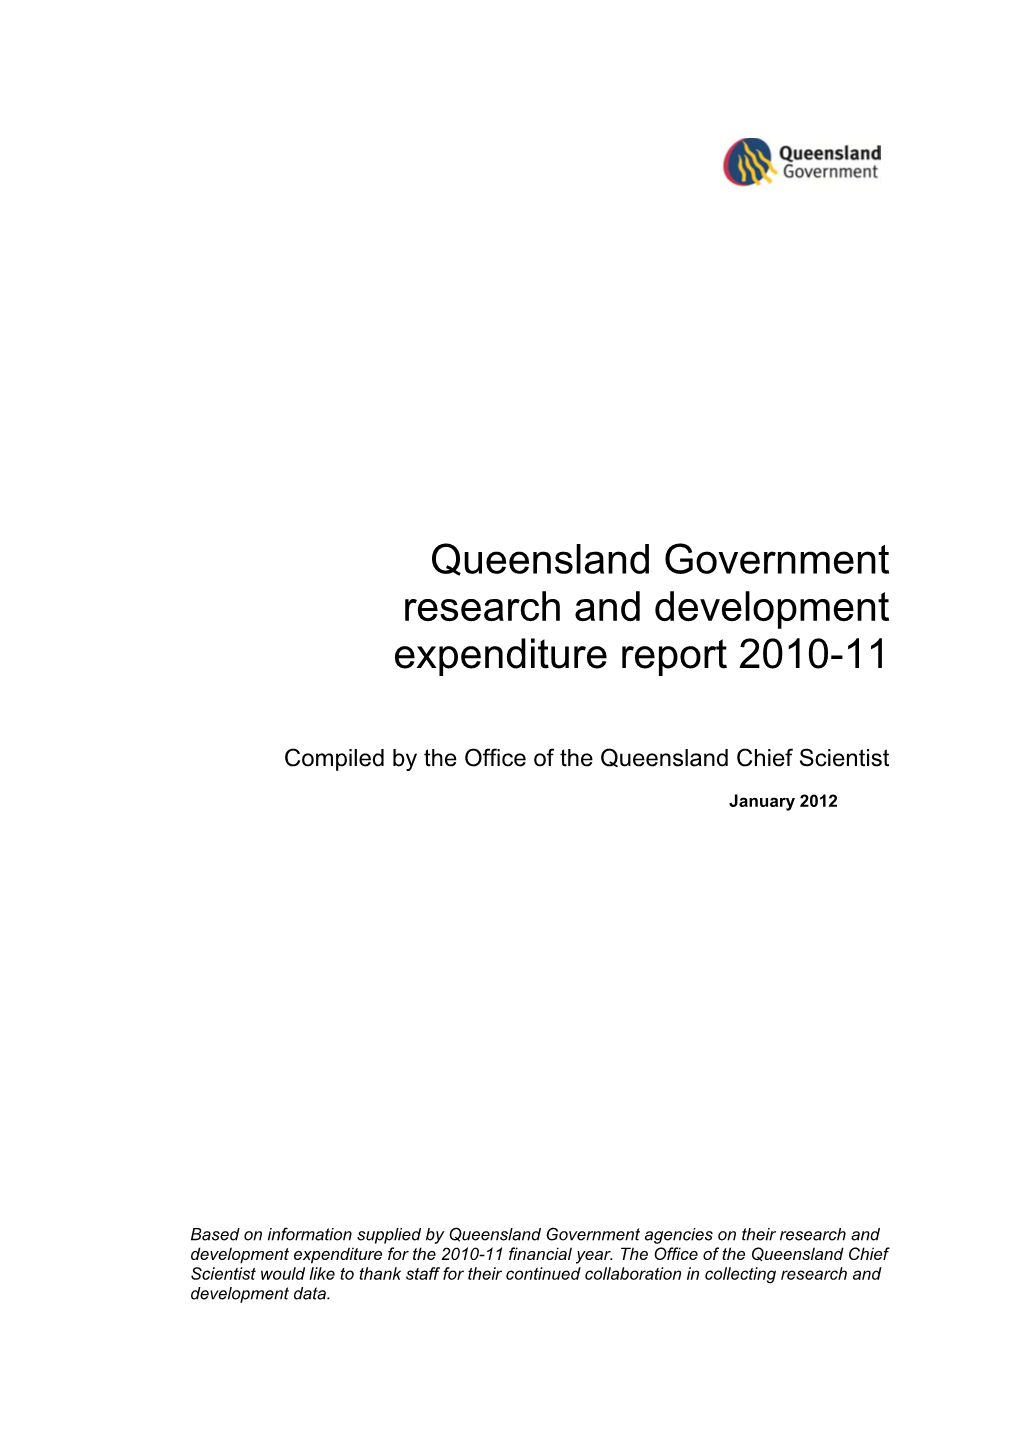 Queensland Government Research and Development Expenditure Report 2010-11